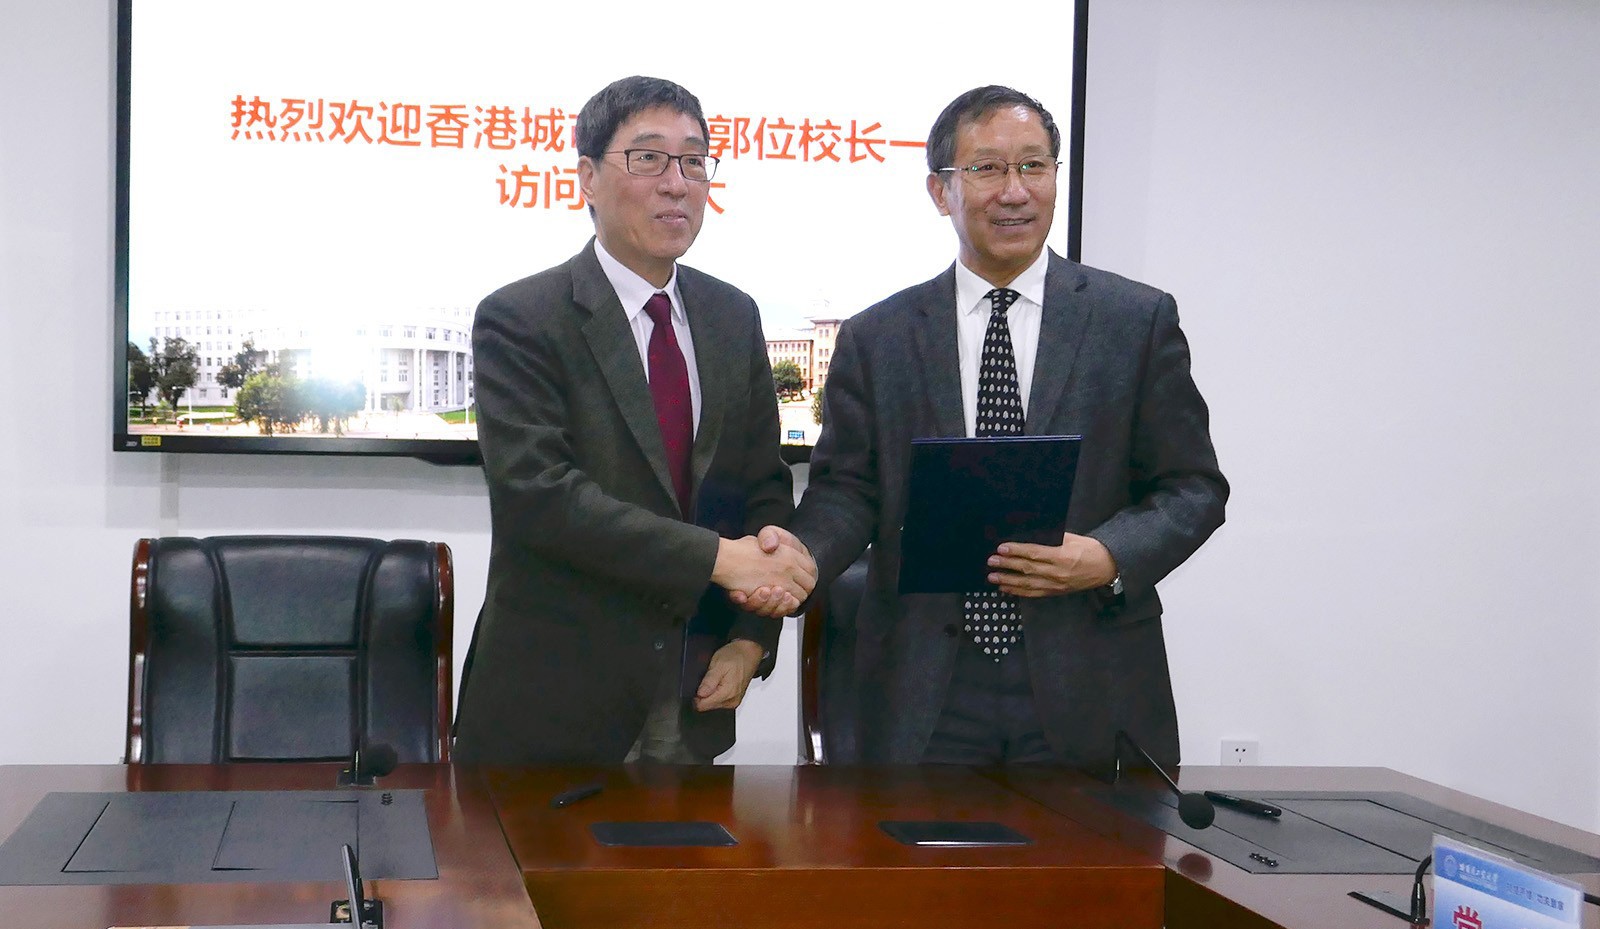 Professor Kuo (left) and Professor Zhou sign the MOU.